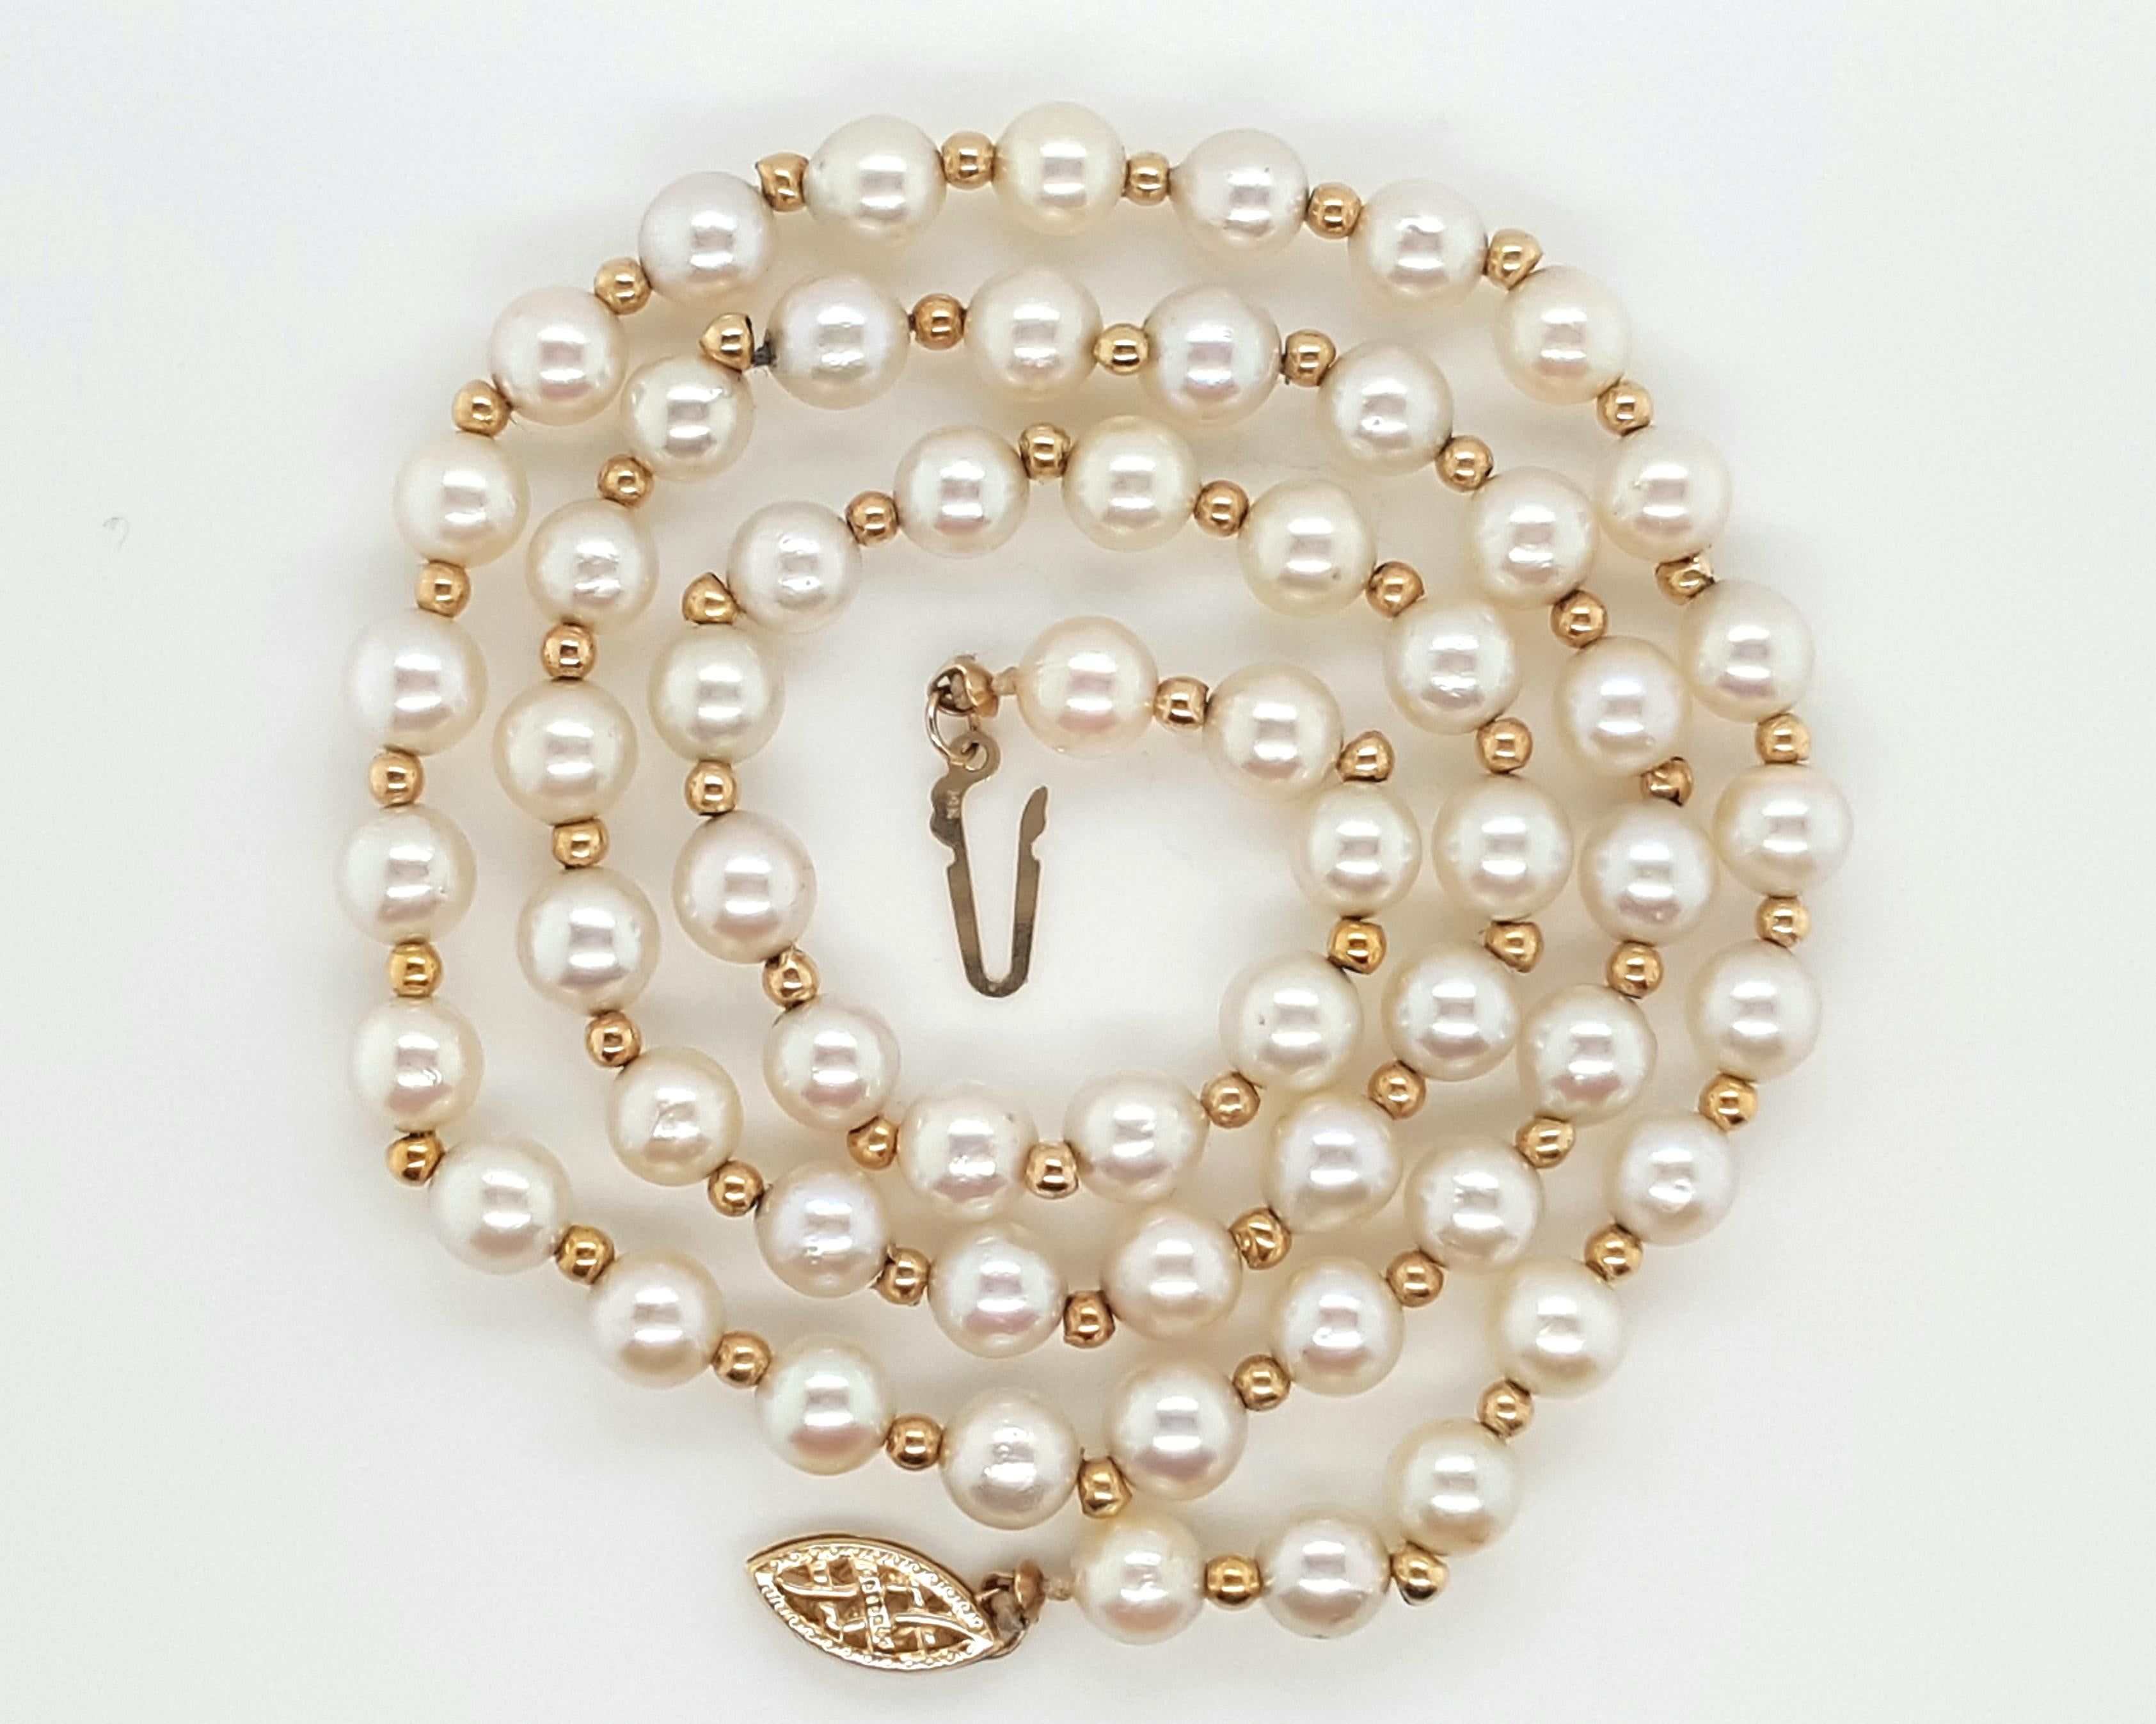 Round Cut Akoya Pearl Strand Accented by 14 Karat Yellow Gold Beads Necklace